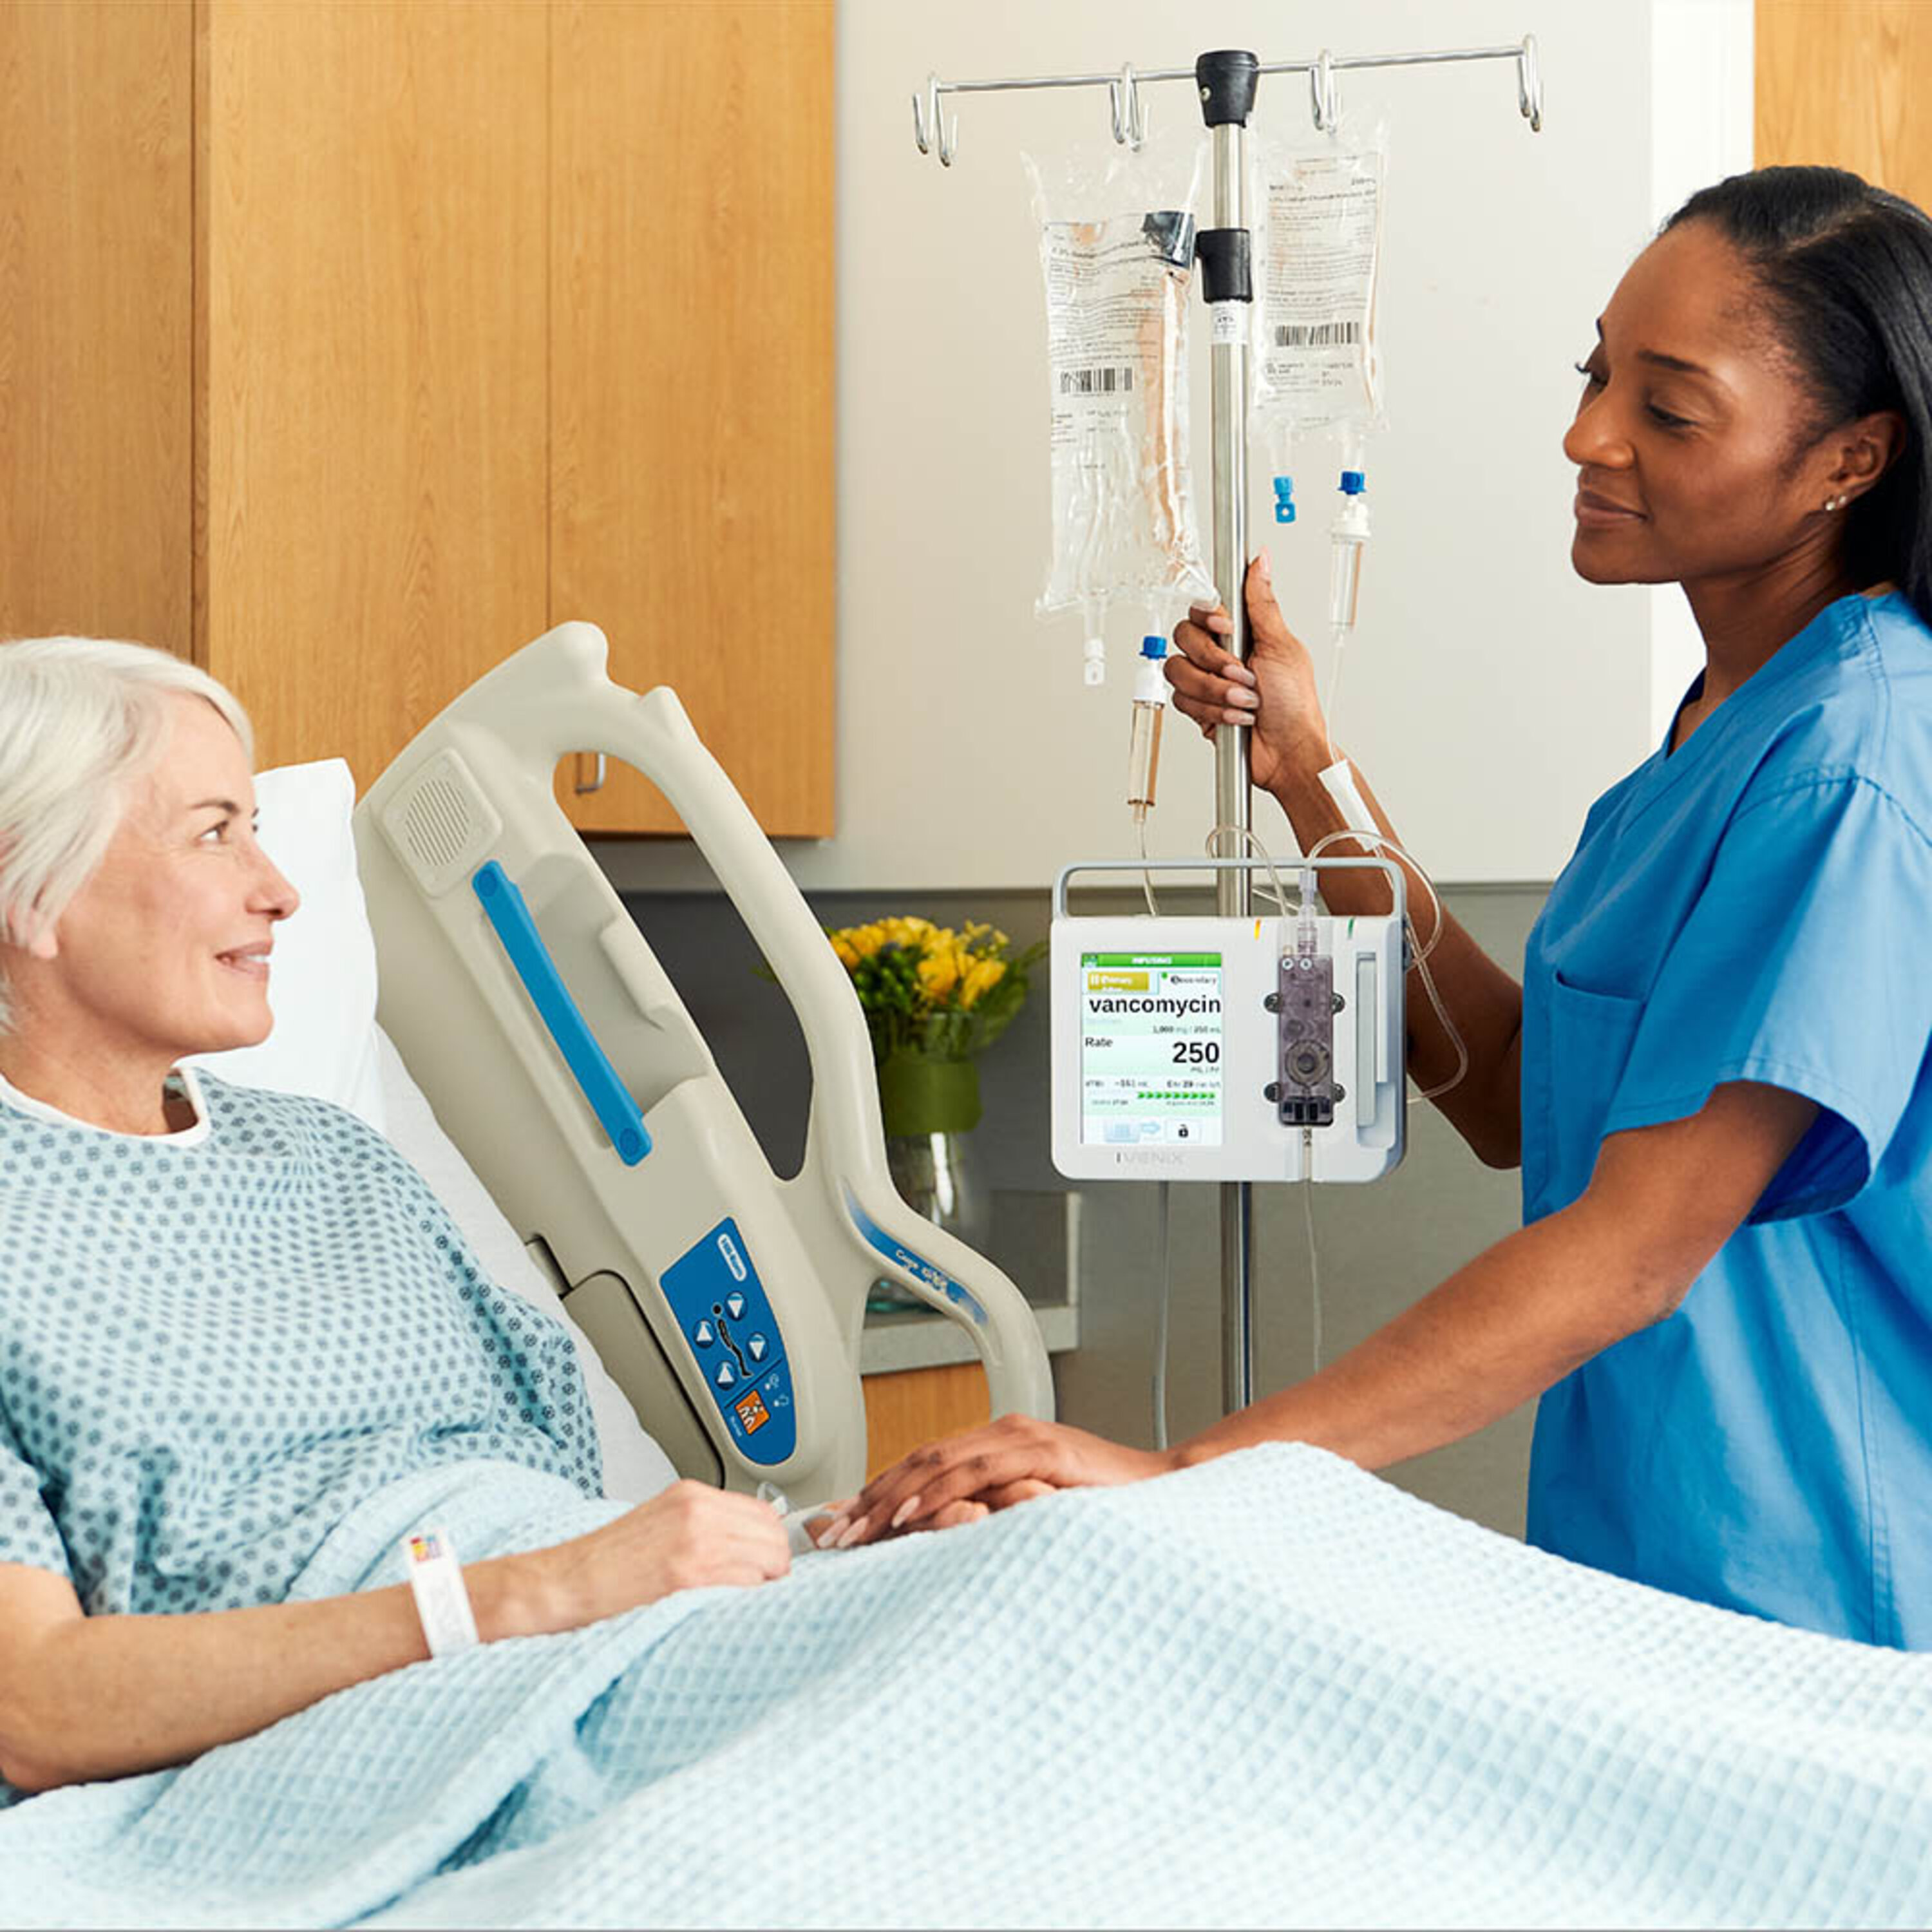 Work Smarter with Advanced Infusion Pump Technology